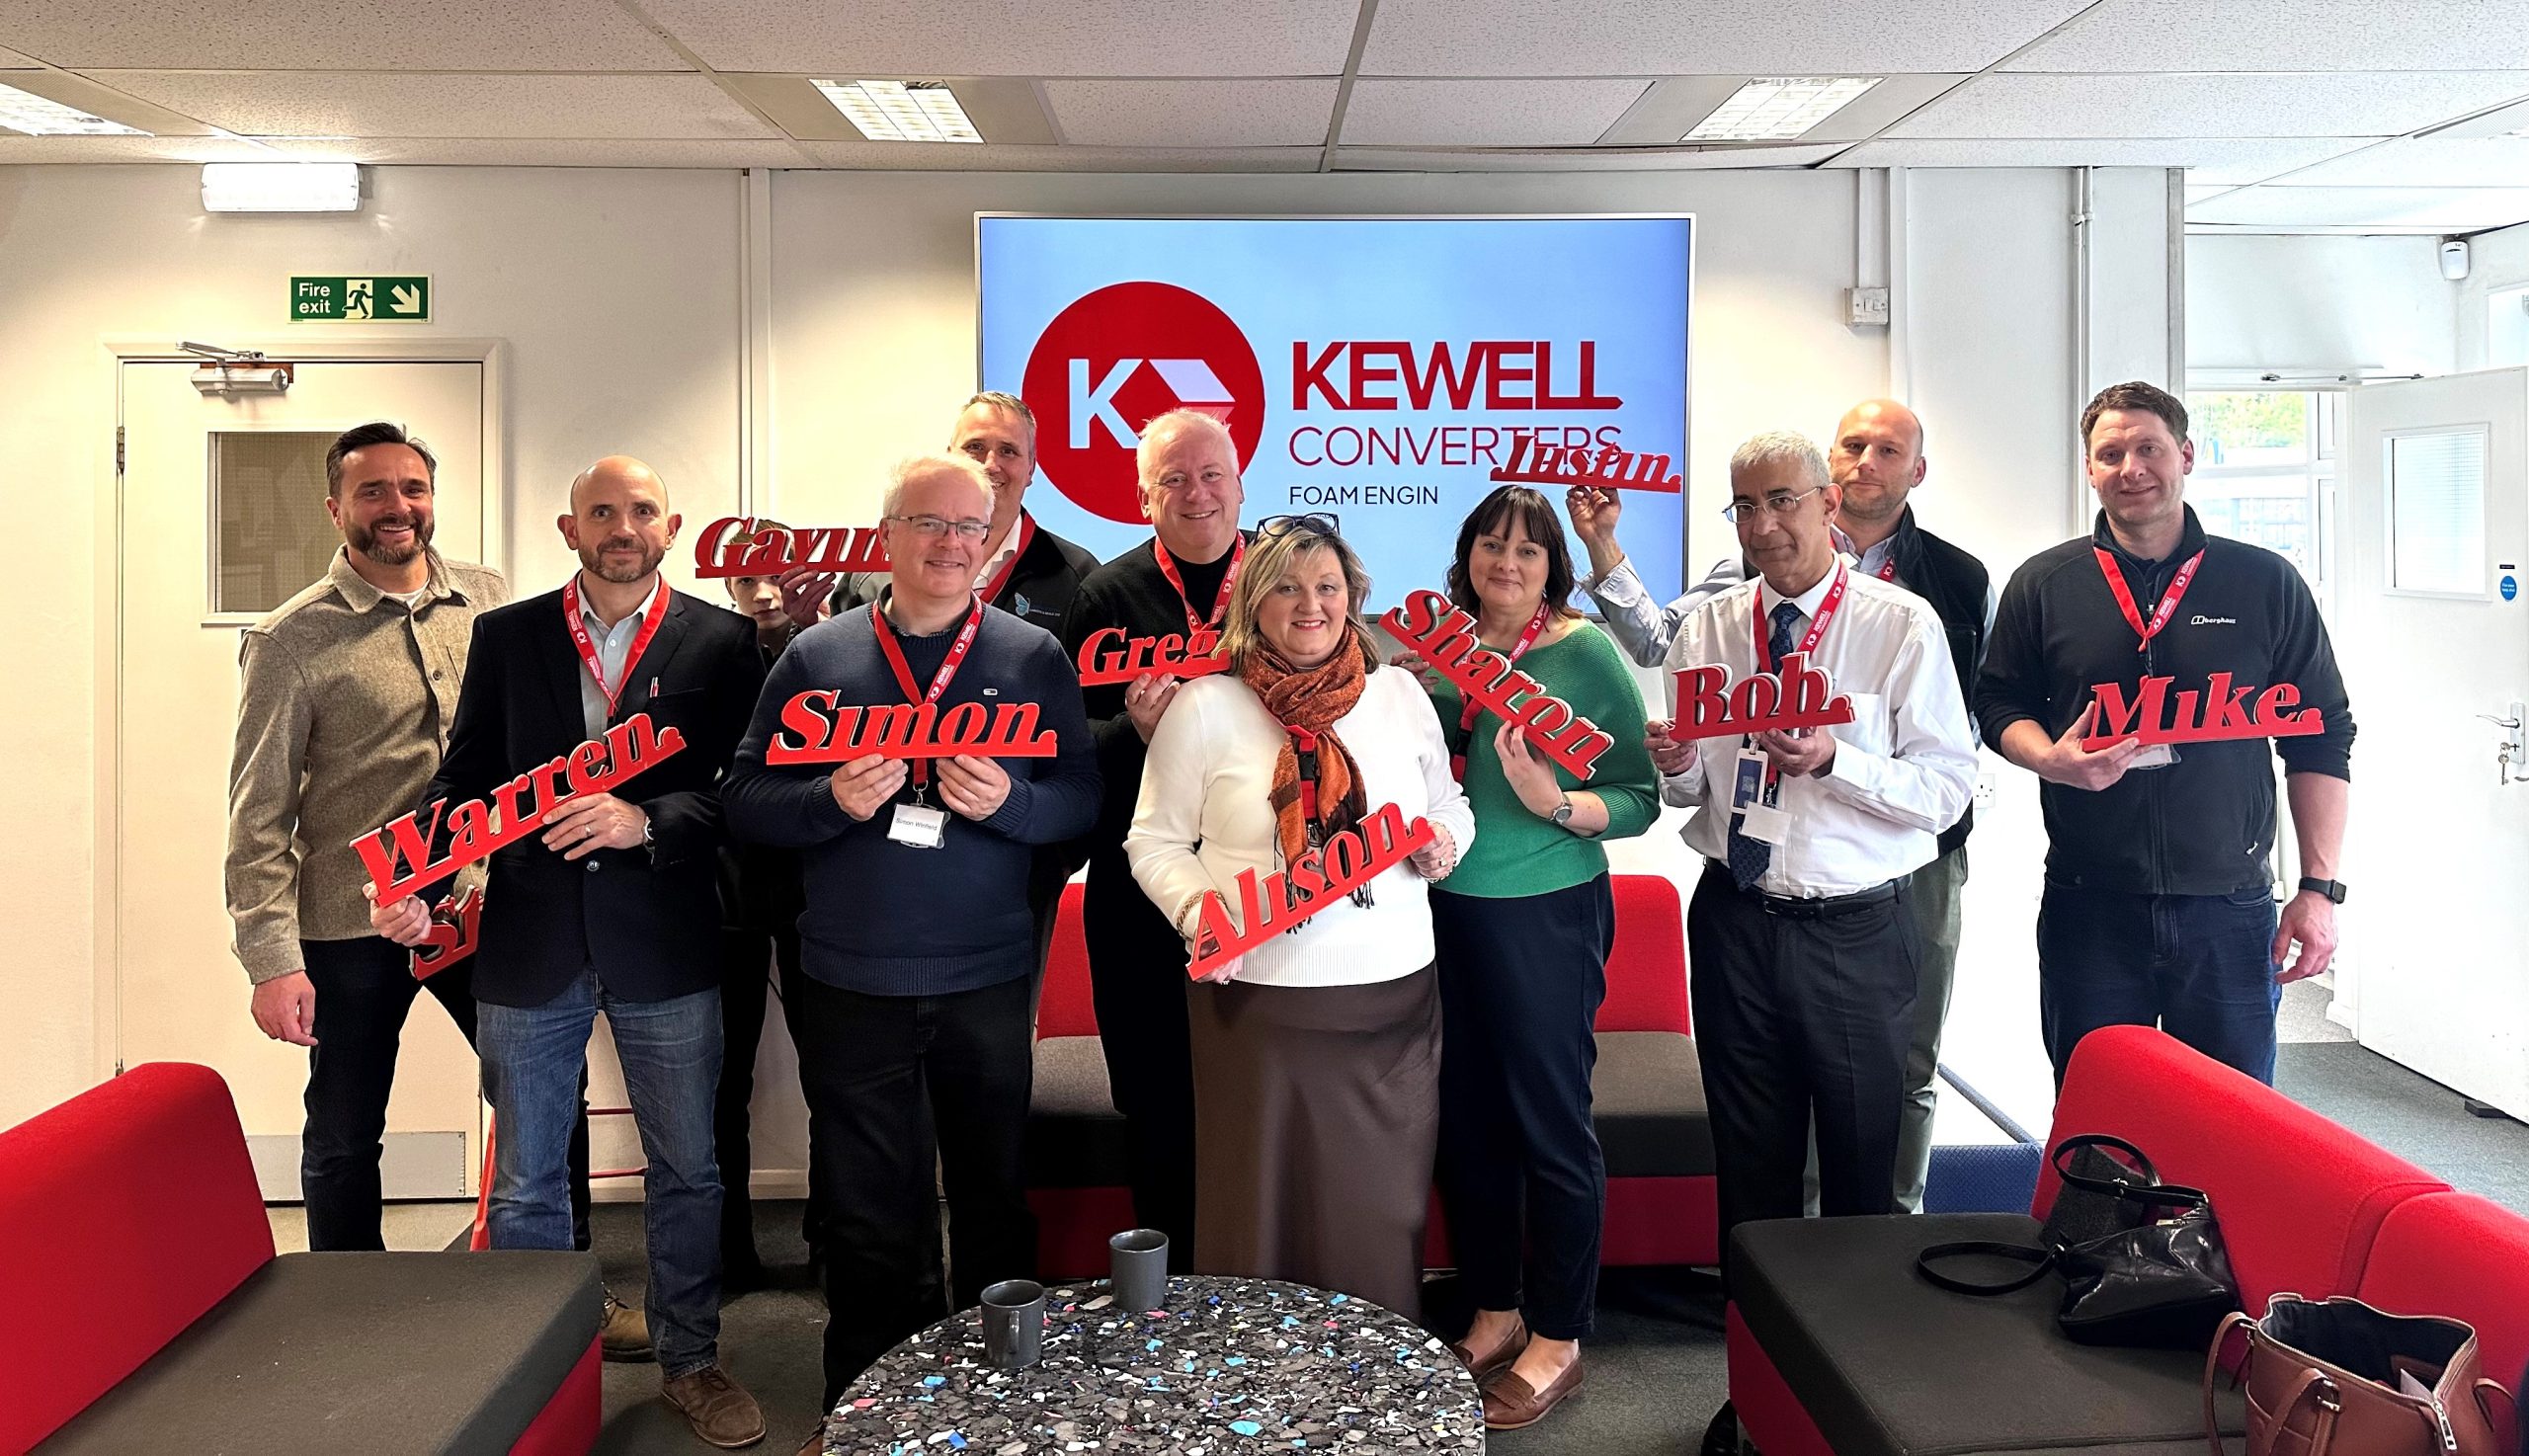 Kewell Converters invite members from the UK Gasket & Sealing Association to a factory tour